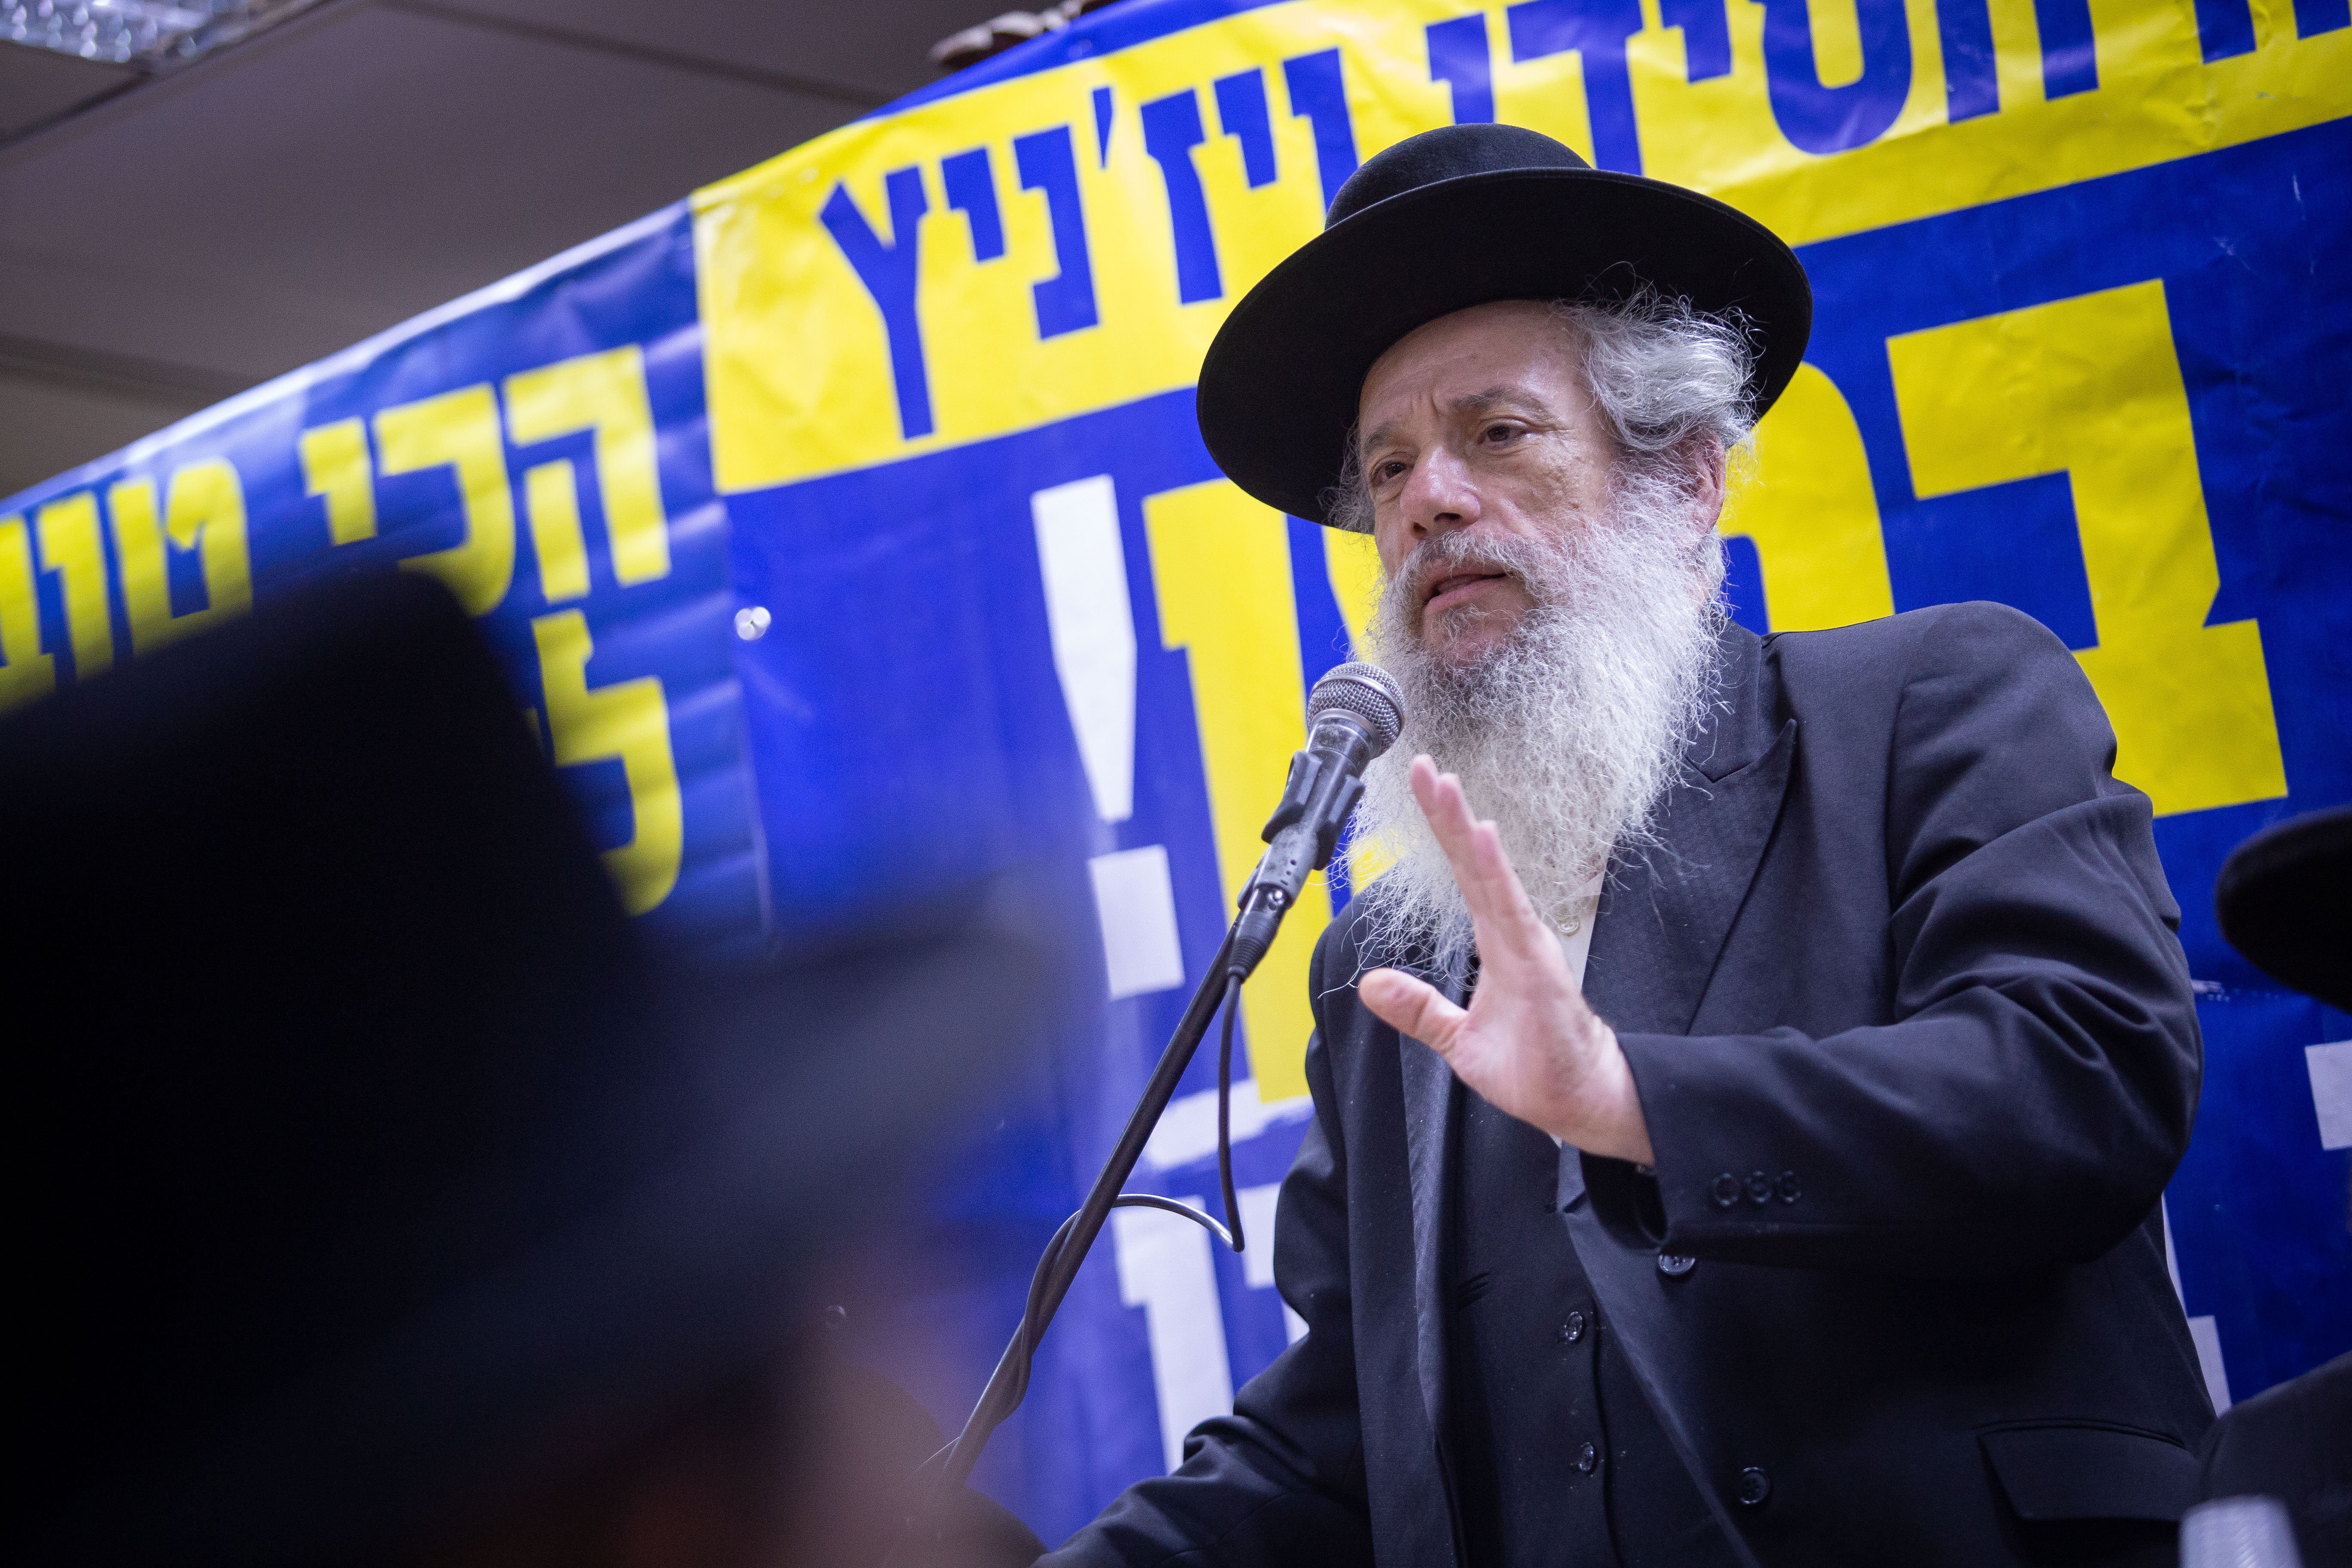 The Political Structure of Haredi Local Authorities and Its Influence on How They Operate